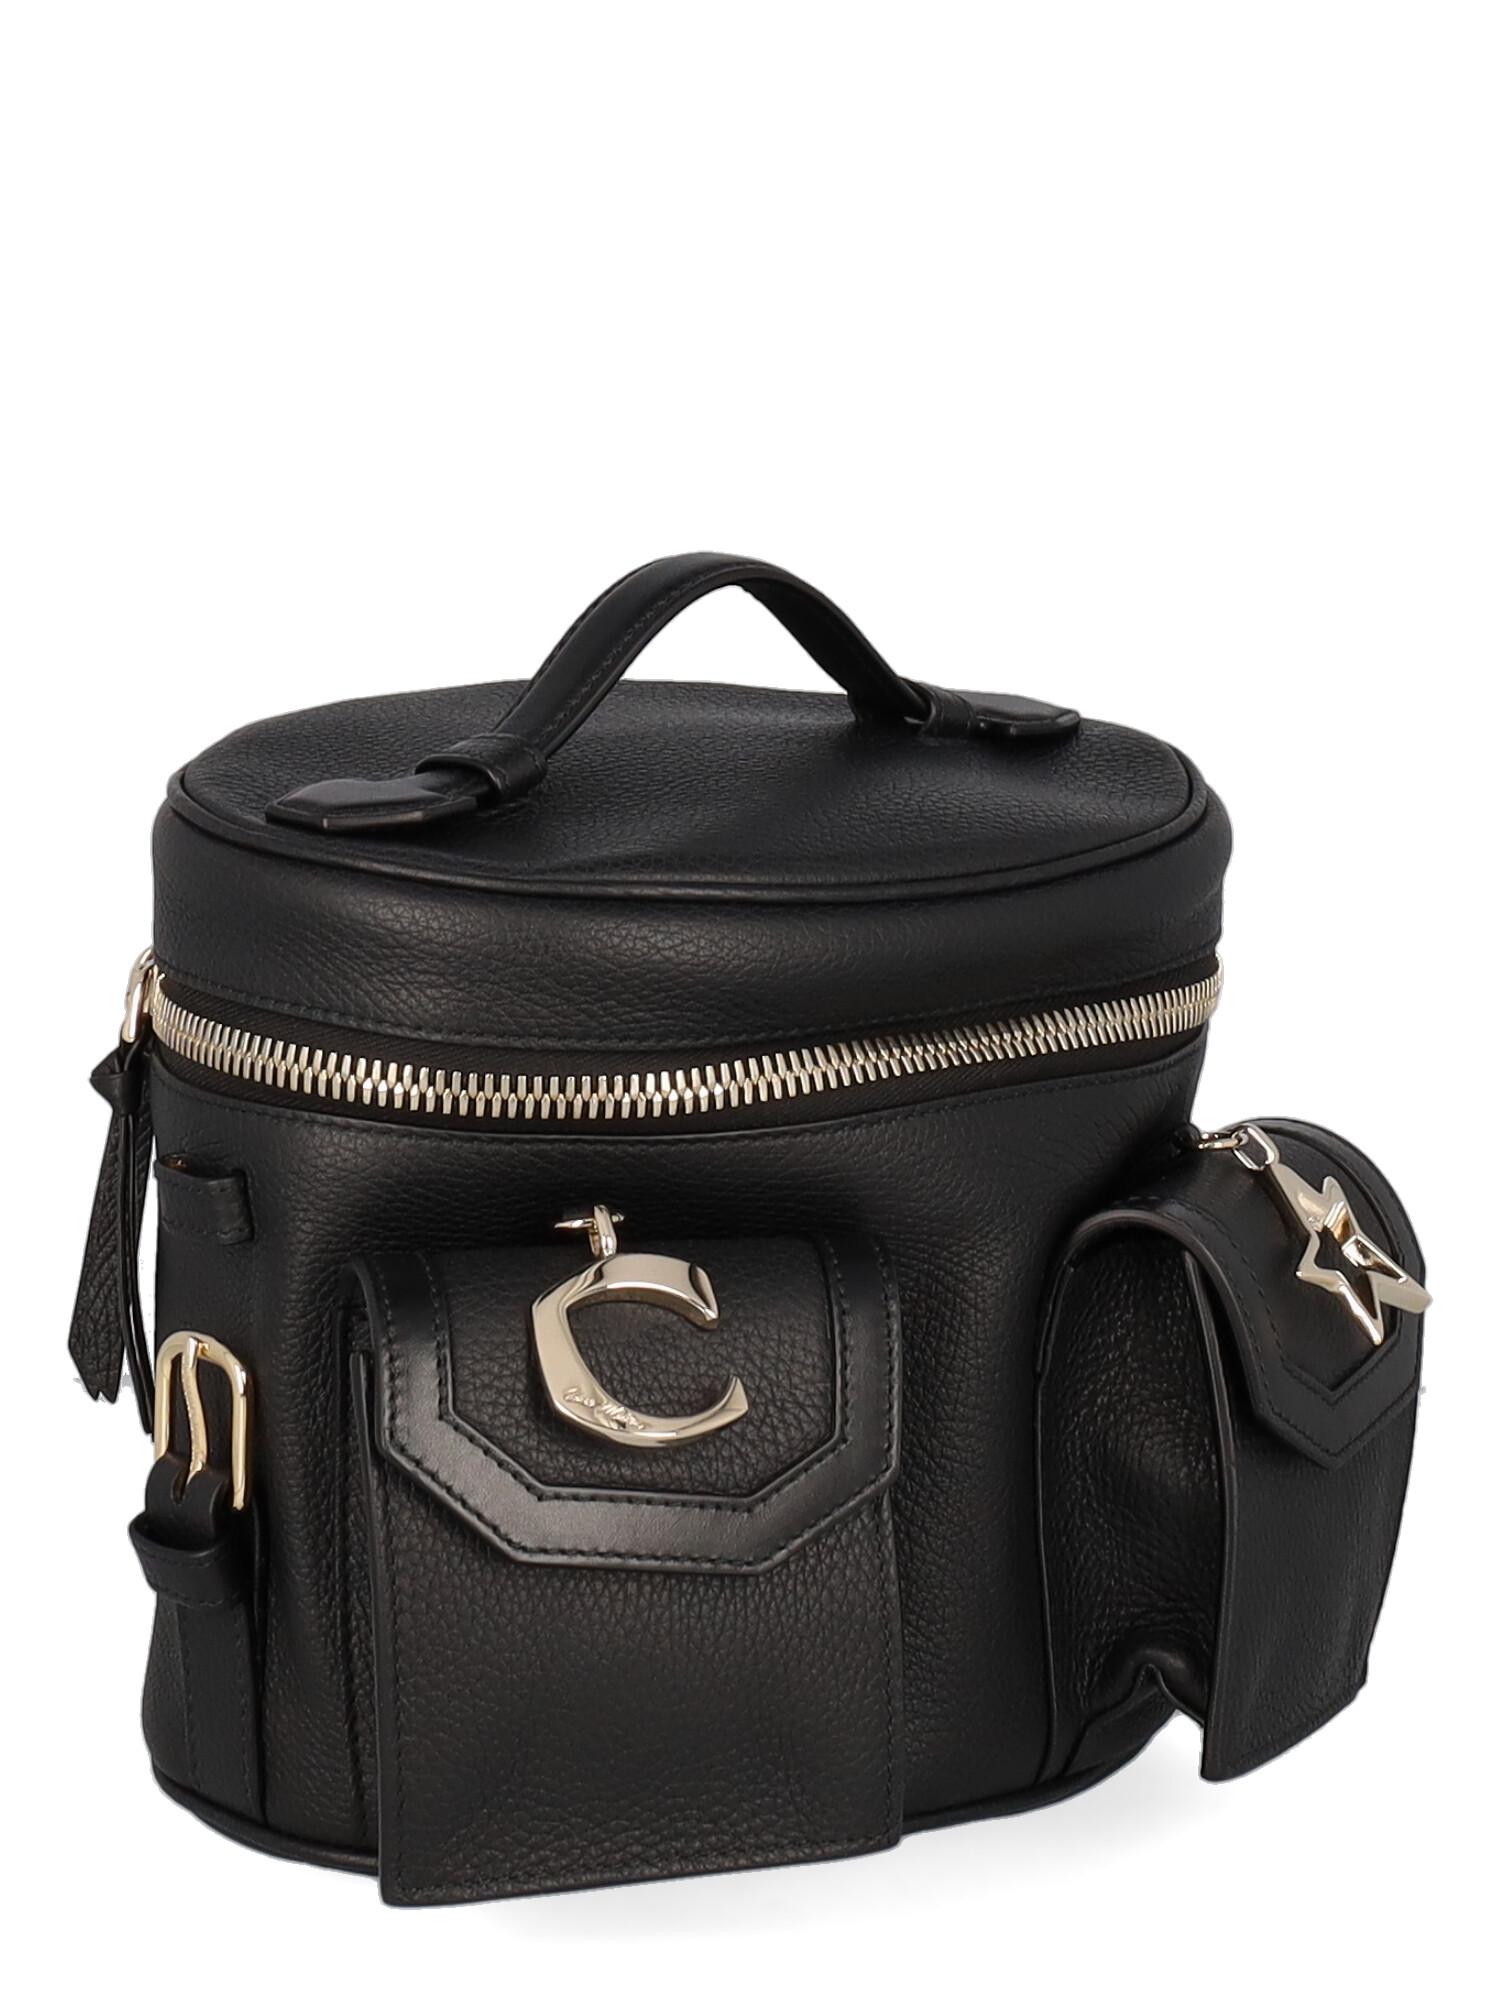 Corto Moltedo Women Backpacks Black Leather  In Good Condition For Sale In Milan, IT